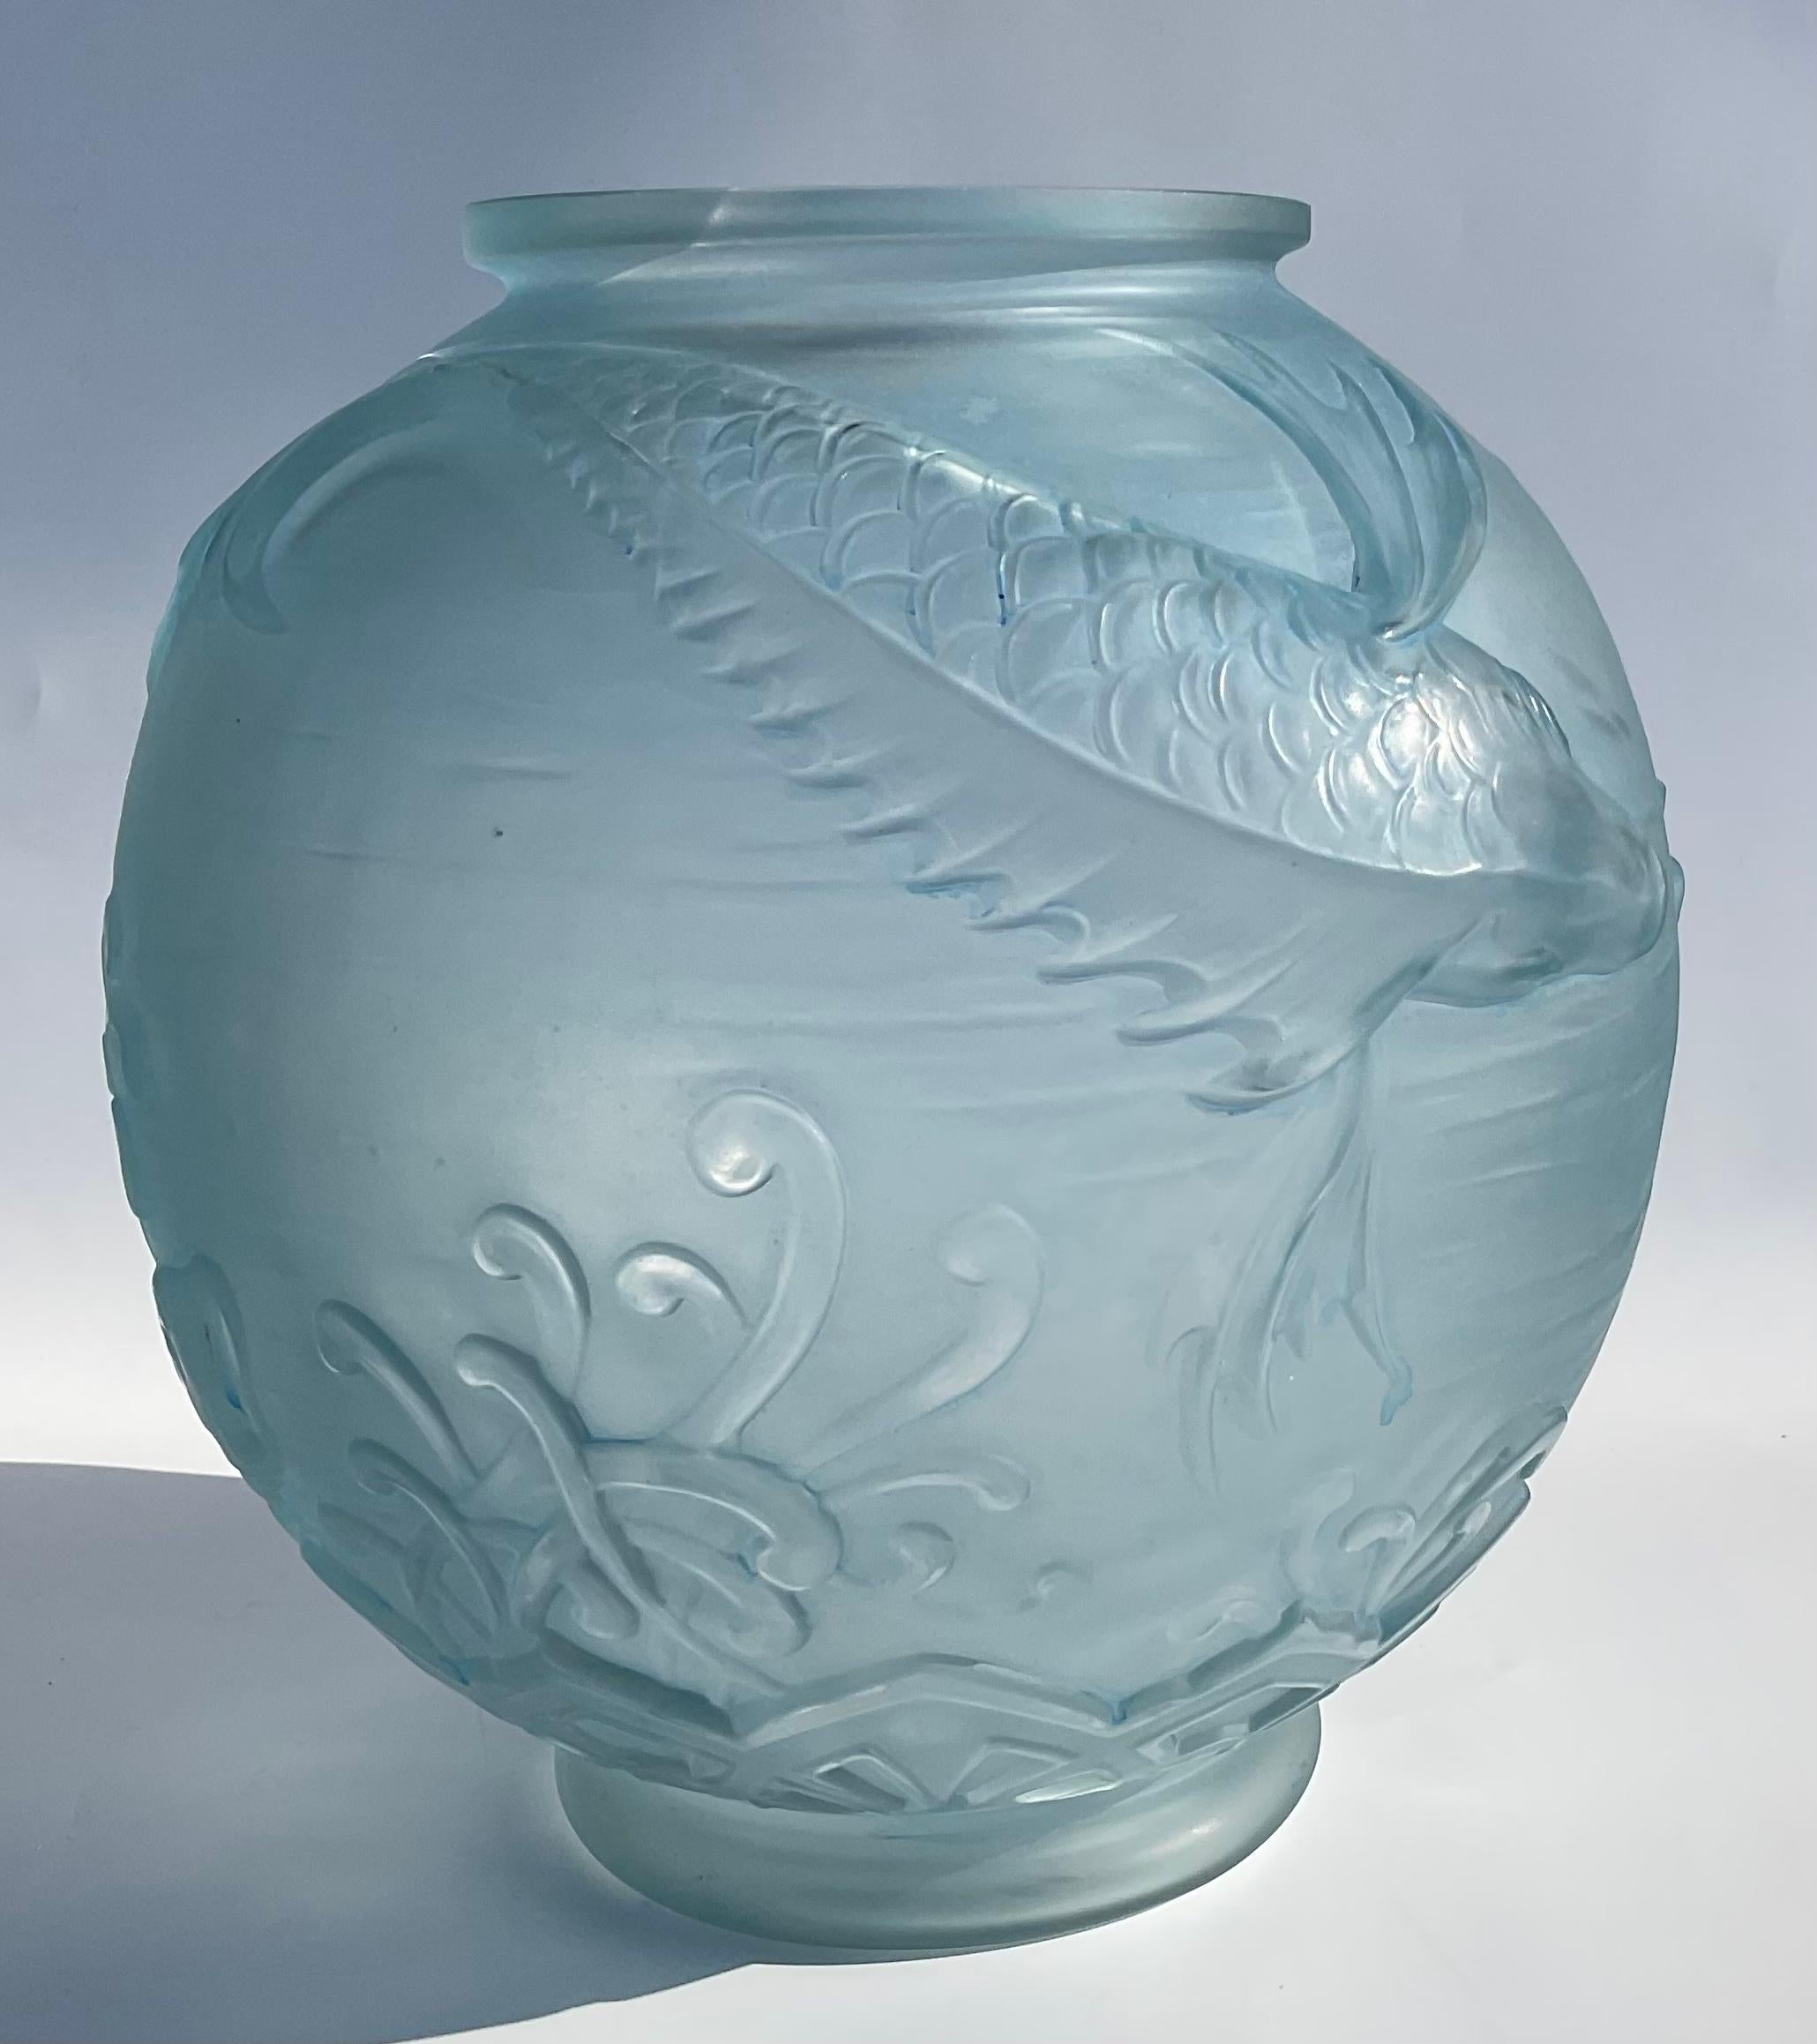 Large Pierre D’Avesn Large French Art Deco Flying fish vase circa 1930s with an amazing blue patina. Very well designed piece.